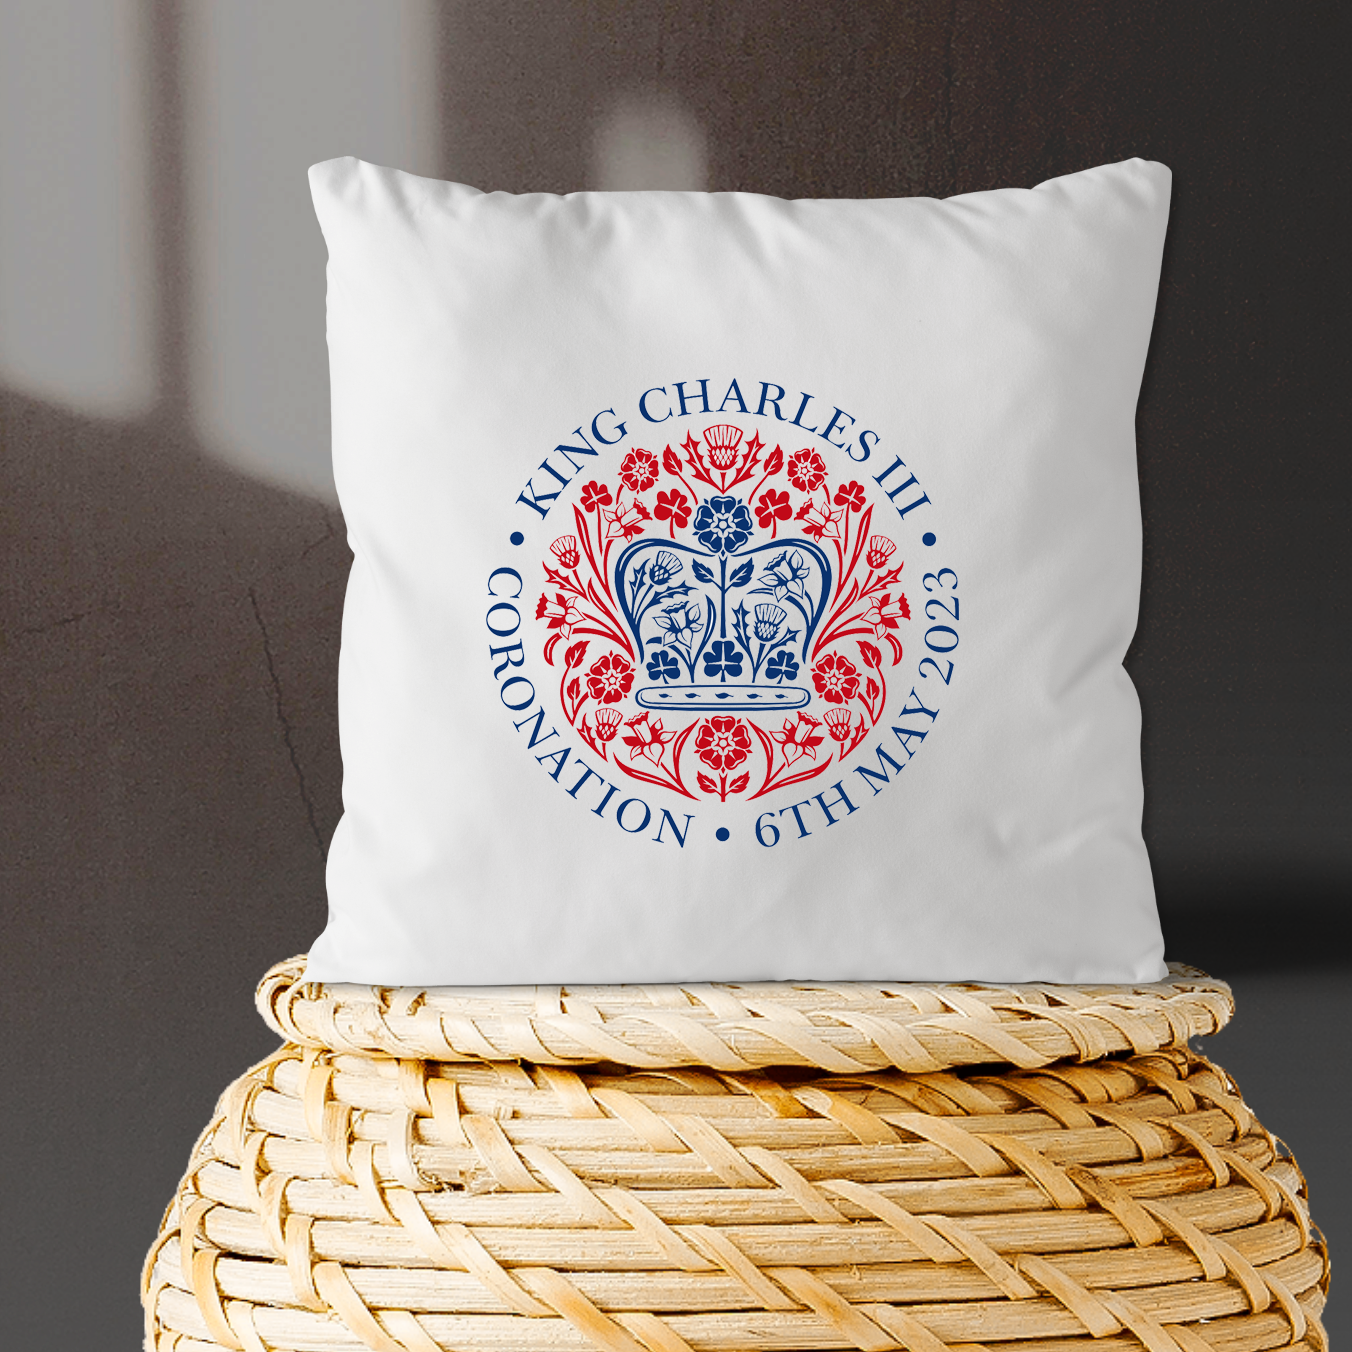 cushion cover for king charles IIi coronation queen consort cushion cover